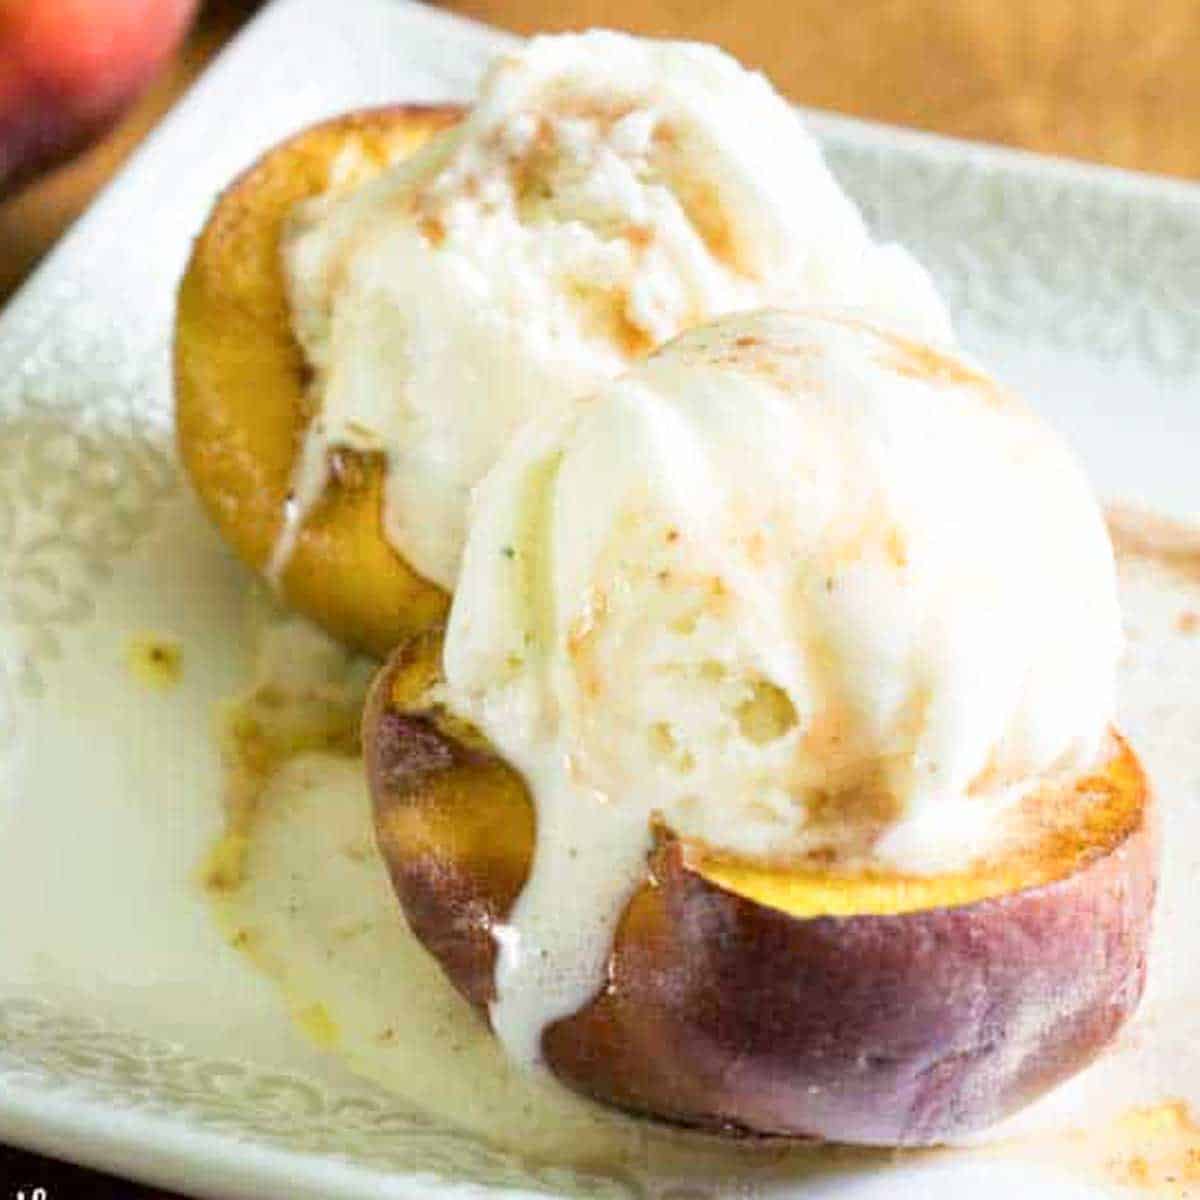 Baked Peaches with Maple Syrup, Cinnamon, and Brown Sugar